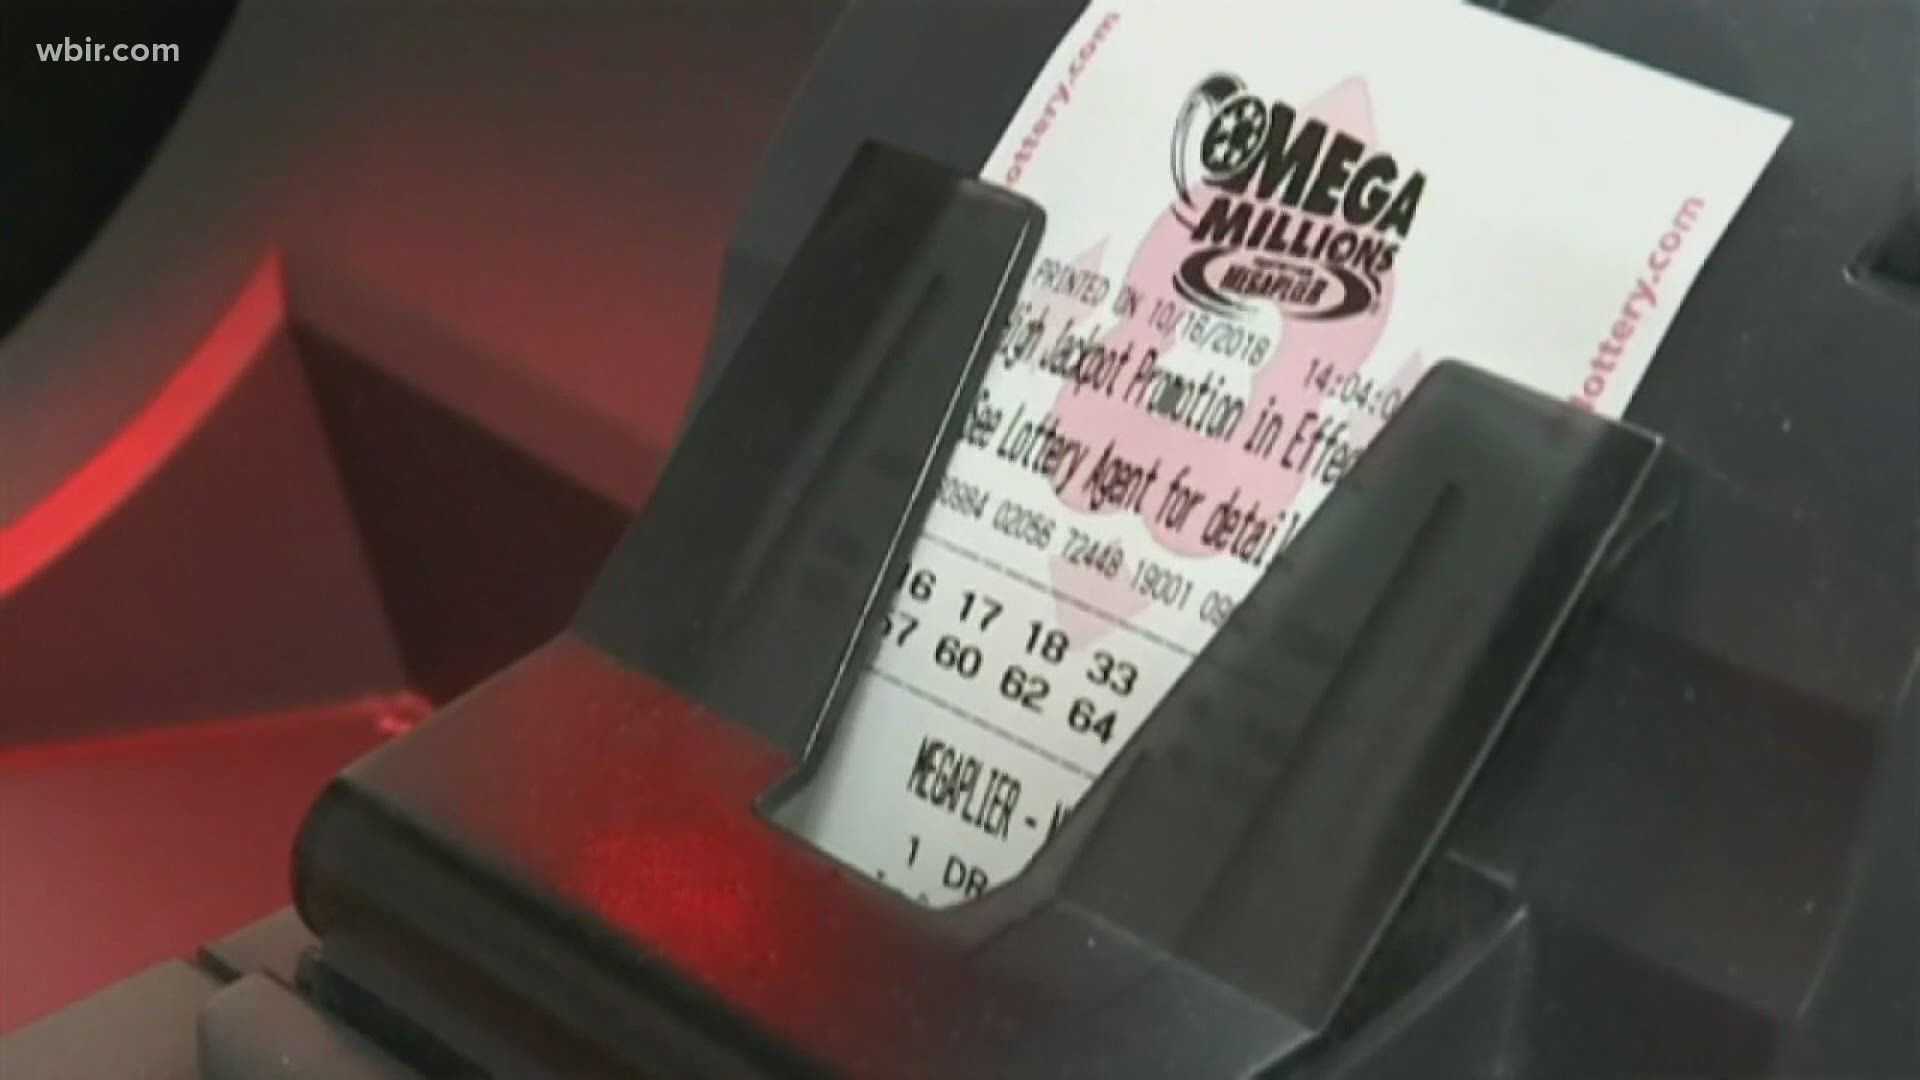 Are you feeling lucky? The Megamillions Jackpot is up for grabs tonight at $750 million.